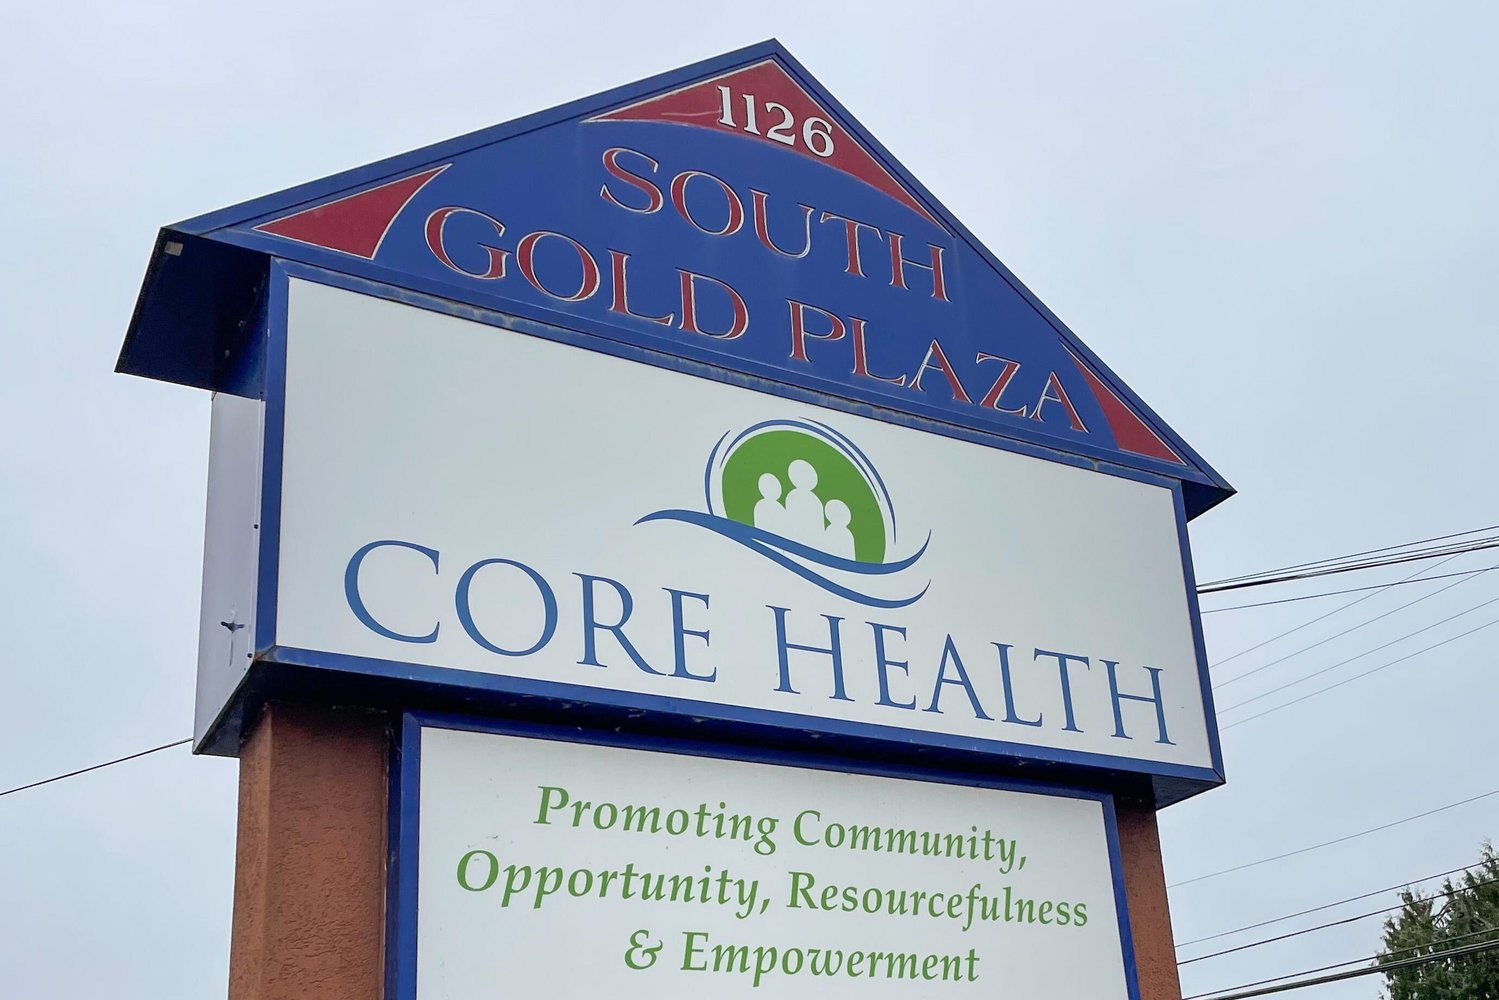 CORE Health is located at 1126 South Gold St. in Centralia.